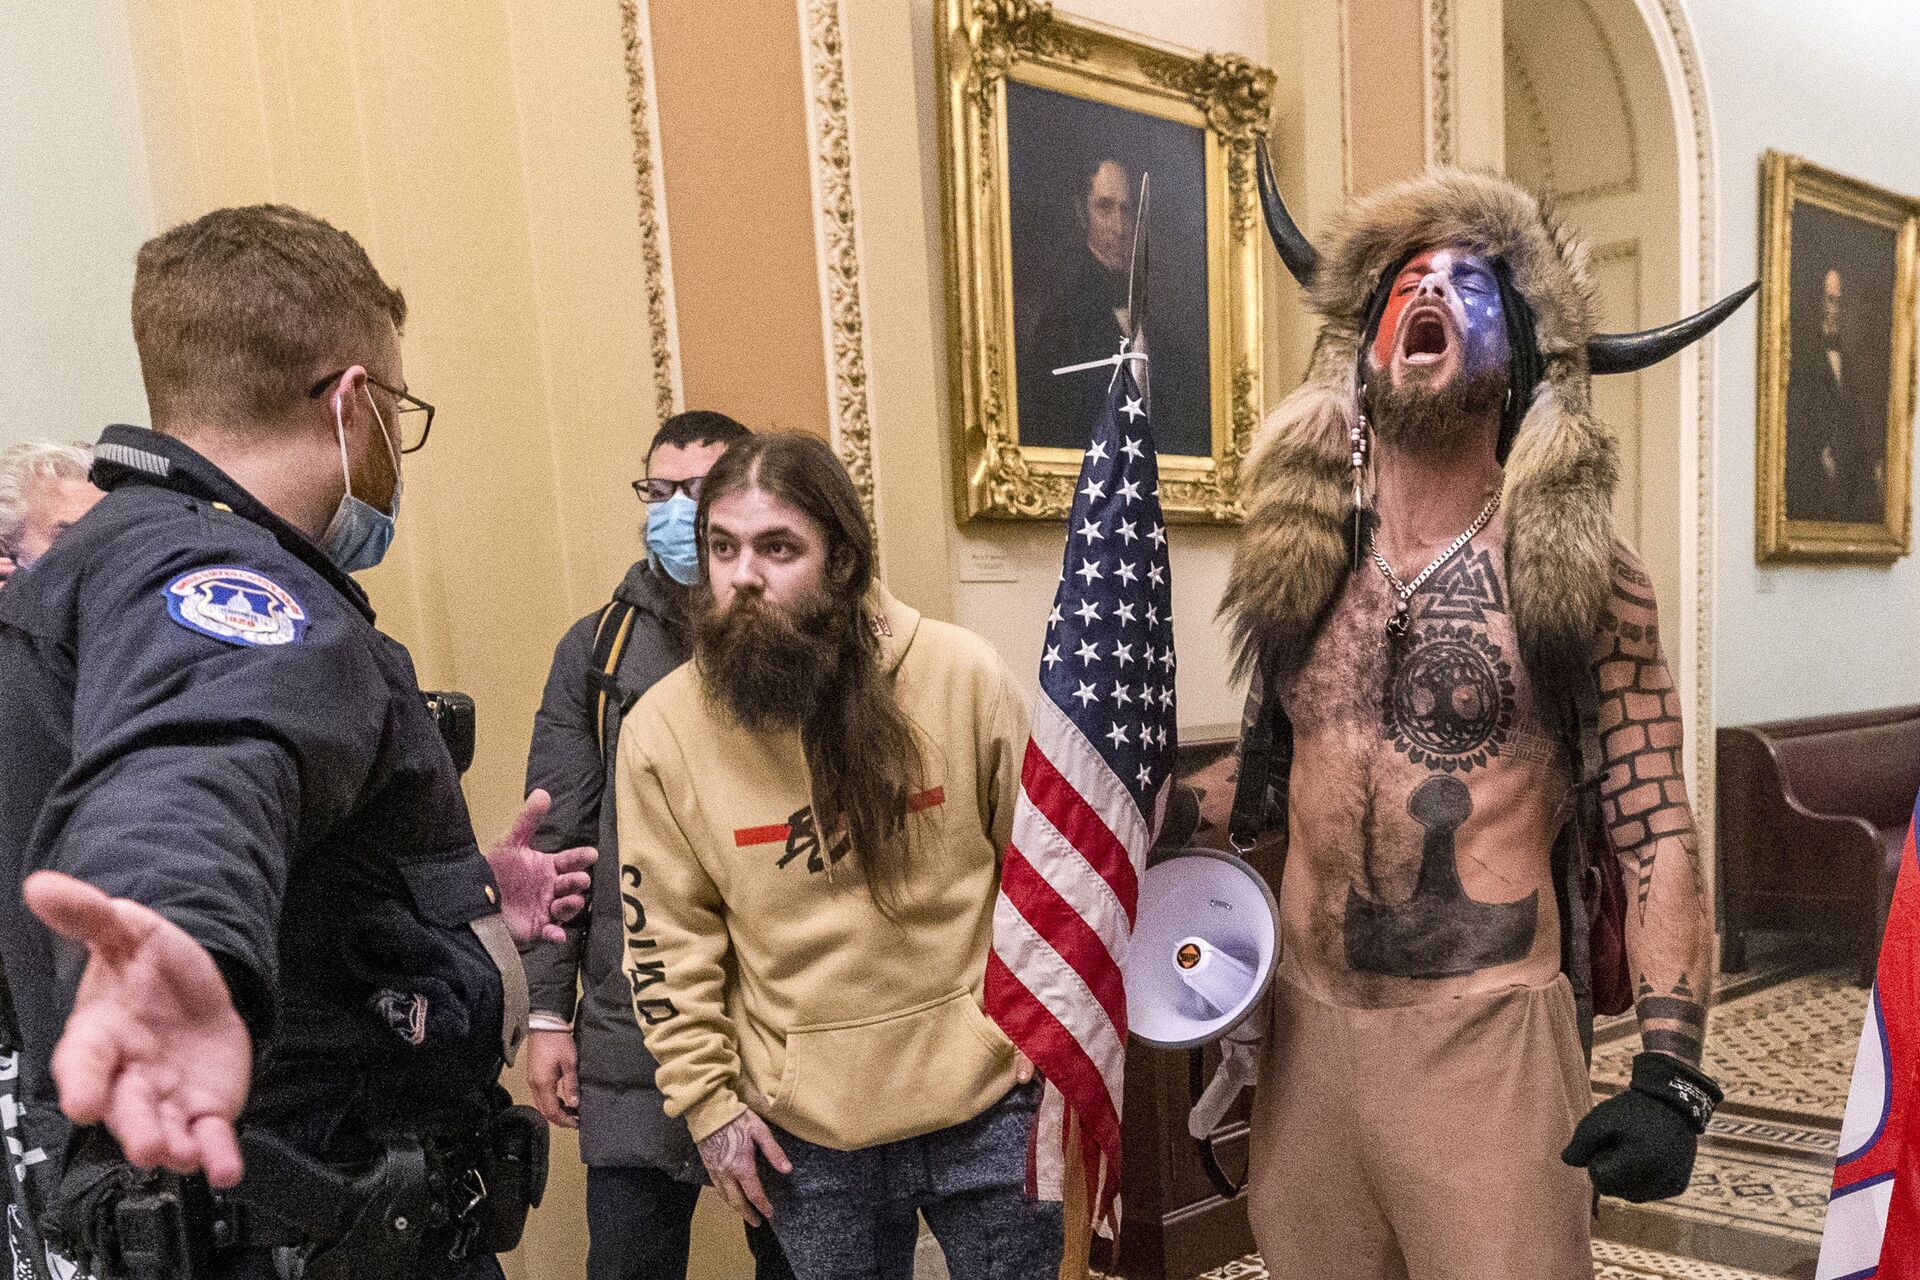 FILE - In this Wednesday, Jan. 6, 2021 file photo, supporters of President Donald Trump, including Jacob Chansley, right with fur hat, are confronted by U.S. Capitol Police officers outside the Senate Chamber inside the Capitol in Washington. Congress is set to hear from former security officials about what went wrong at the U.S. Capitol on Jan. 6. That's when when a violent mob laid siege to the Capitol and interrupted the counting of electoral votes. Three of the four testifying Tuesday resigned under pressure immediately after the attack, including the former head of the Capitol Police.  - Sputnik International, 1920, 07.09.2021